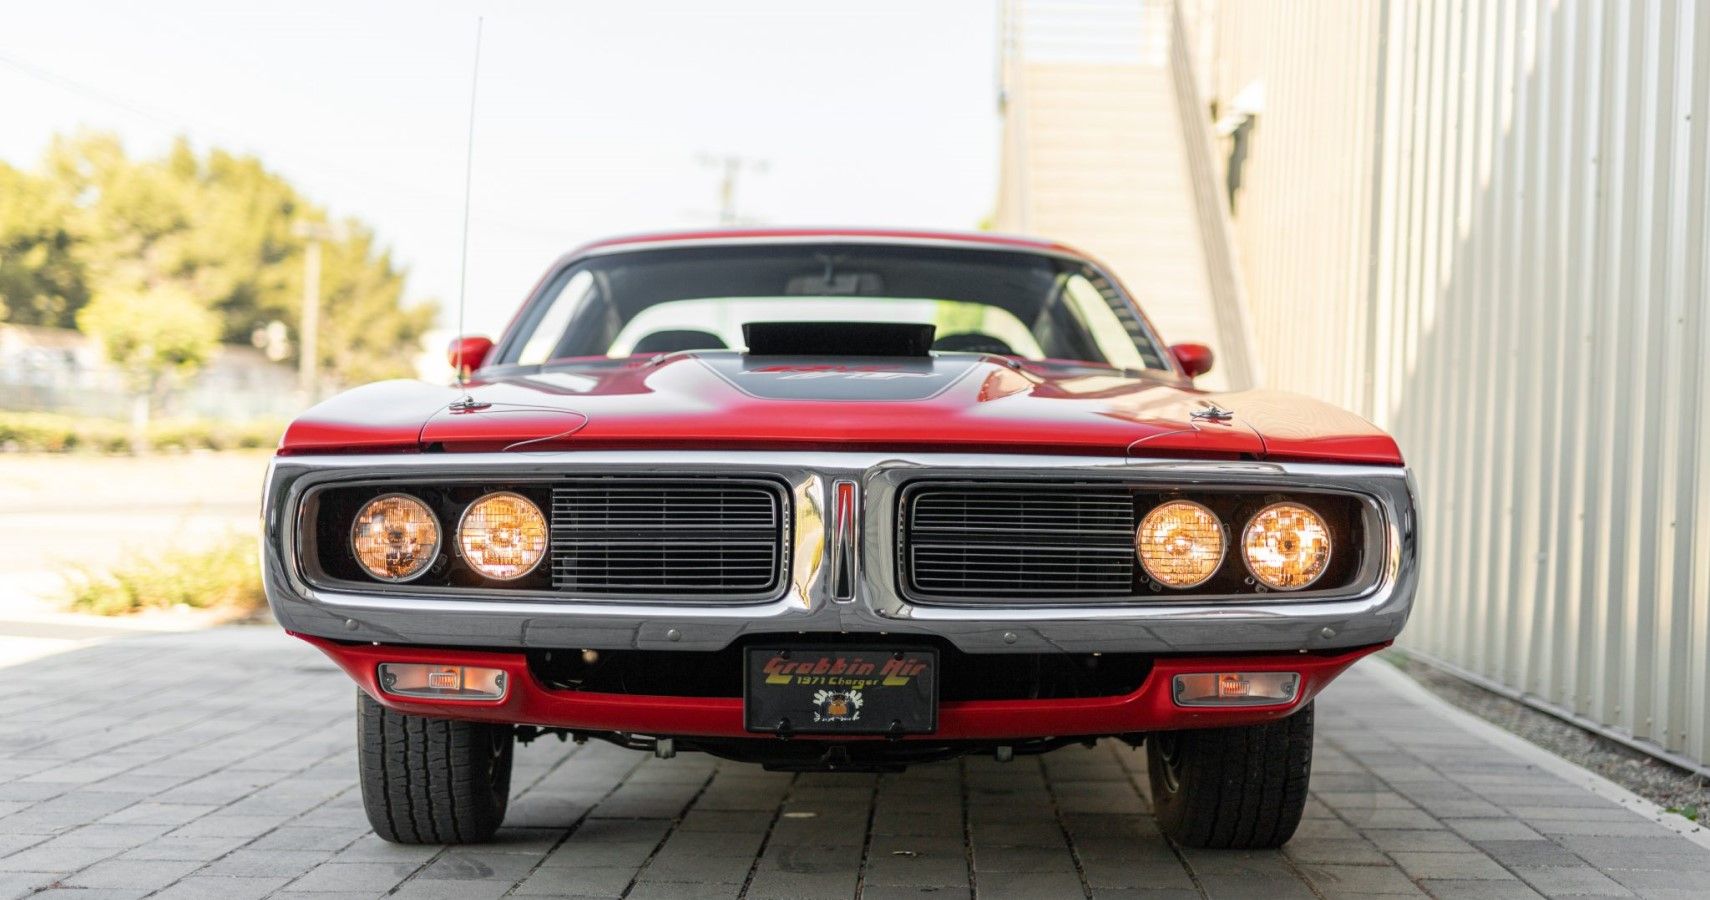 1971 Dodge Charger R/T front fascia close-up view